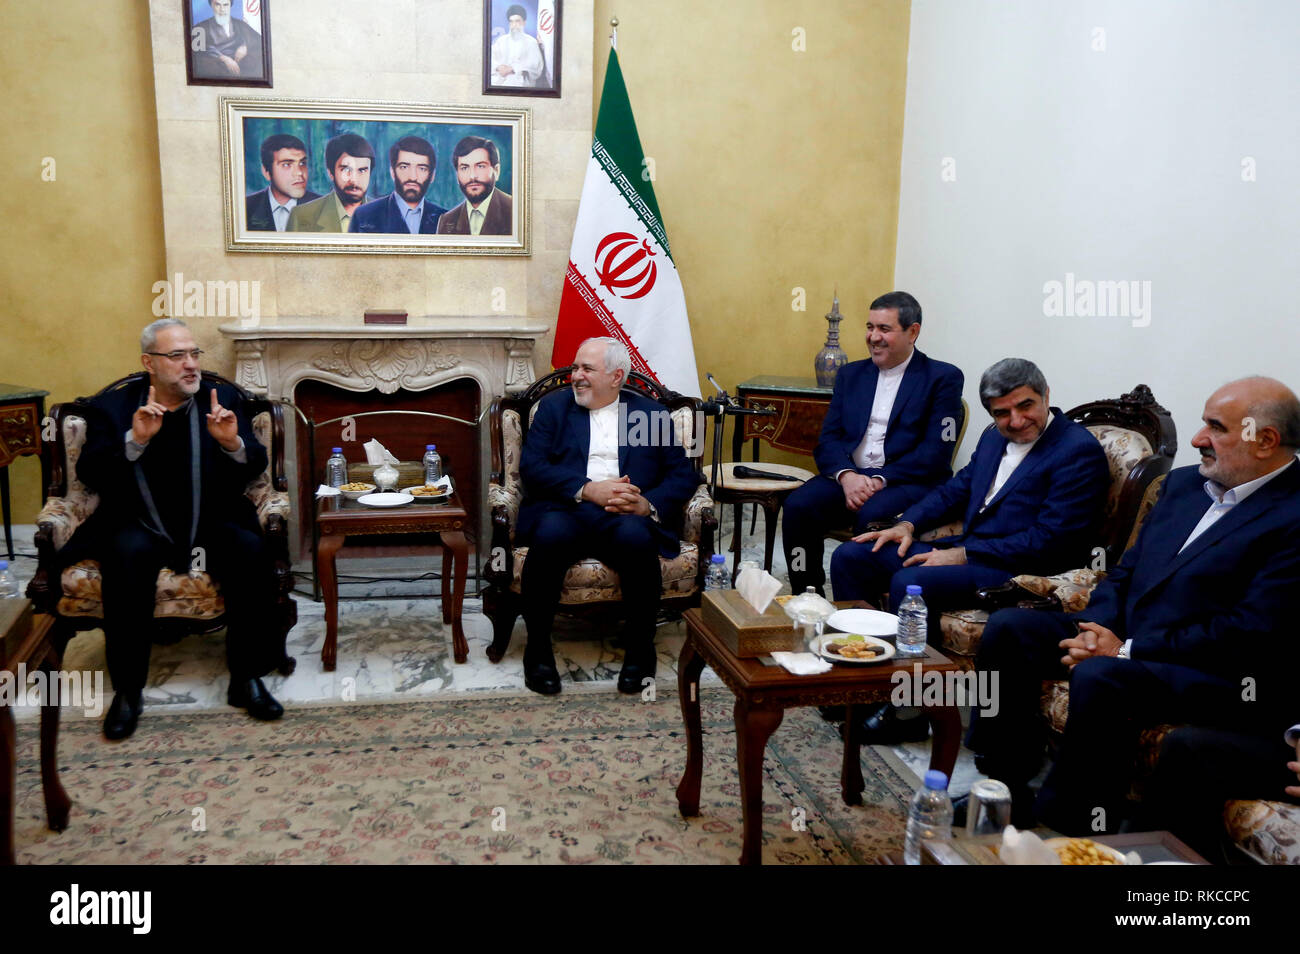 Beirut, Lebanon. 10th Feb, 2019. Iranian Foreign Minister Mohammad Javad Zarif (2nd L) meets with Lebanese officials in the Iranian Embassy in Beirut, Lebanon, on Feb. 10, 2019. Zarif arrived in Lebanon on Sunday for a two-day official visit to meet with Lebanese officials and informed them about Iran's readiness to help Lebanon on all levels. Credit: Bilal Jawich/Xinhua/Alamy Live News Stock Photo